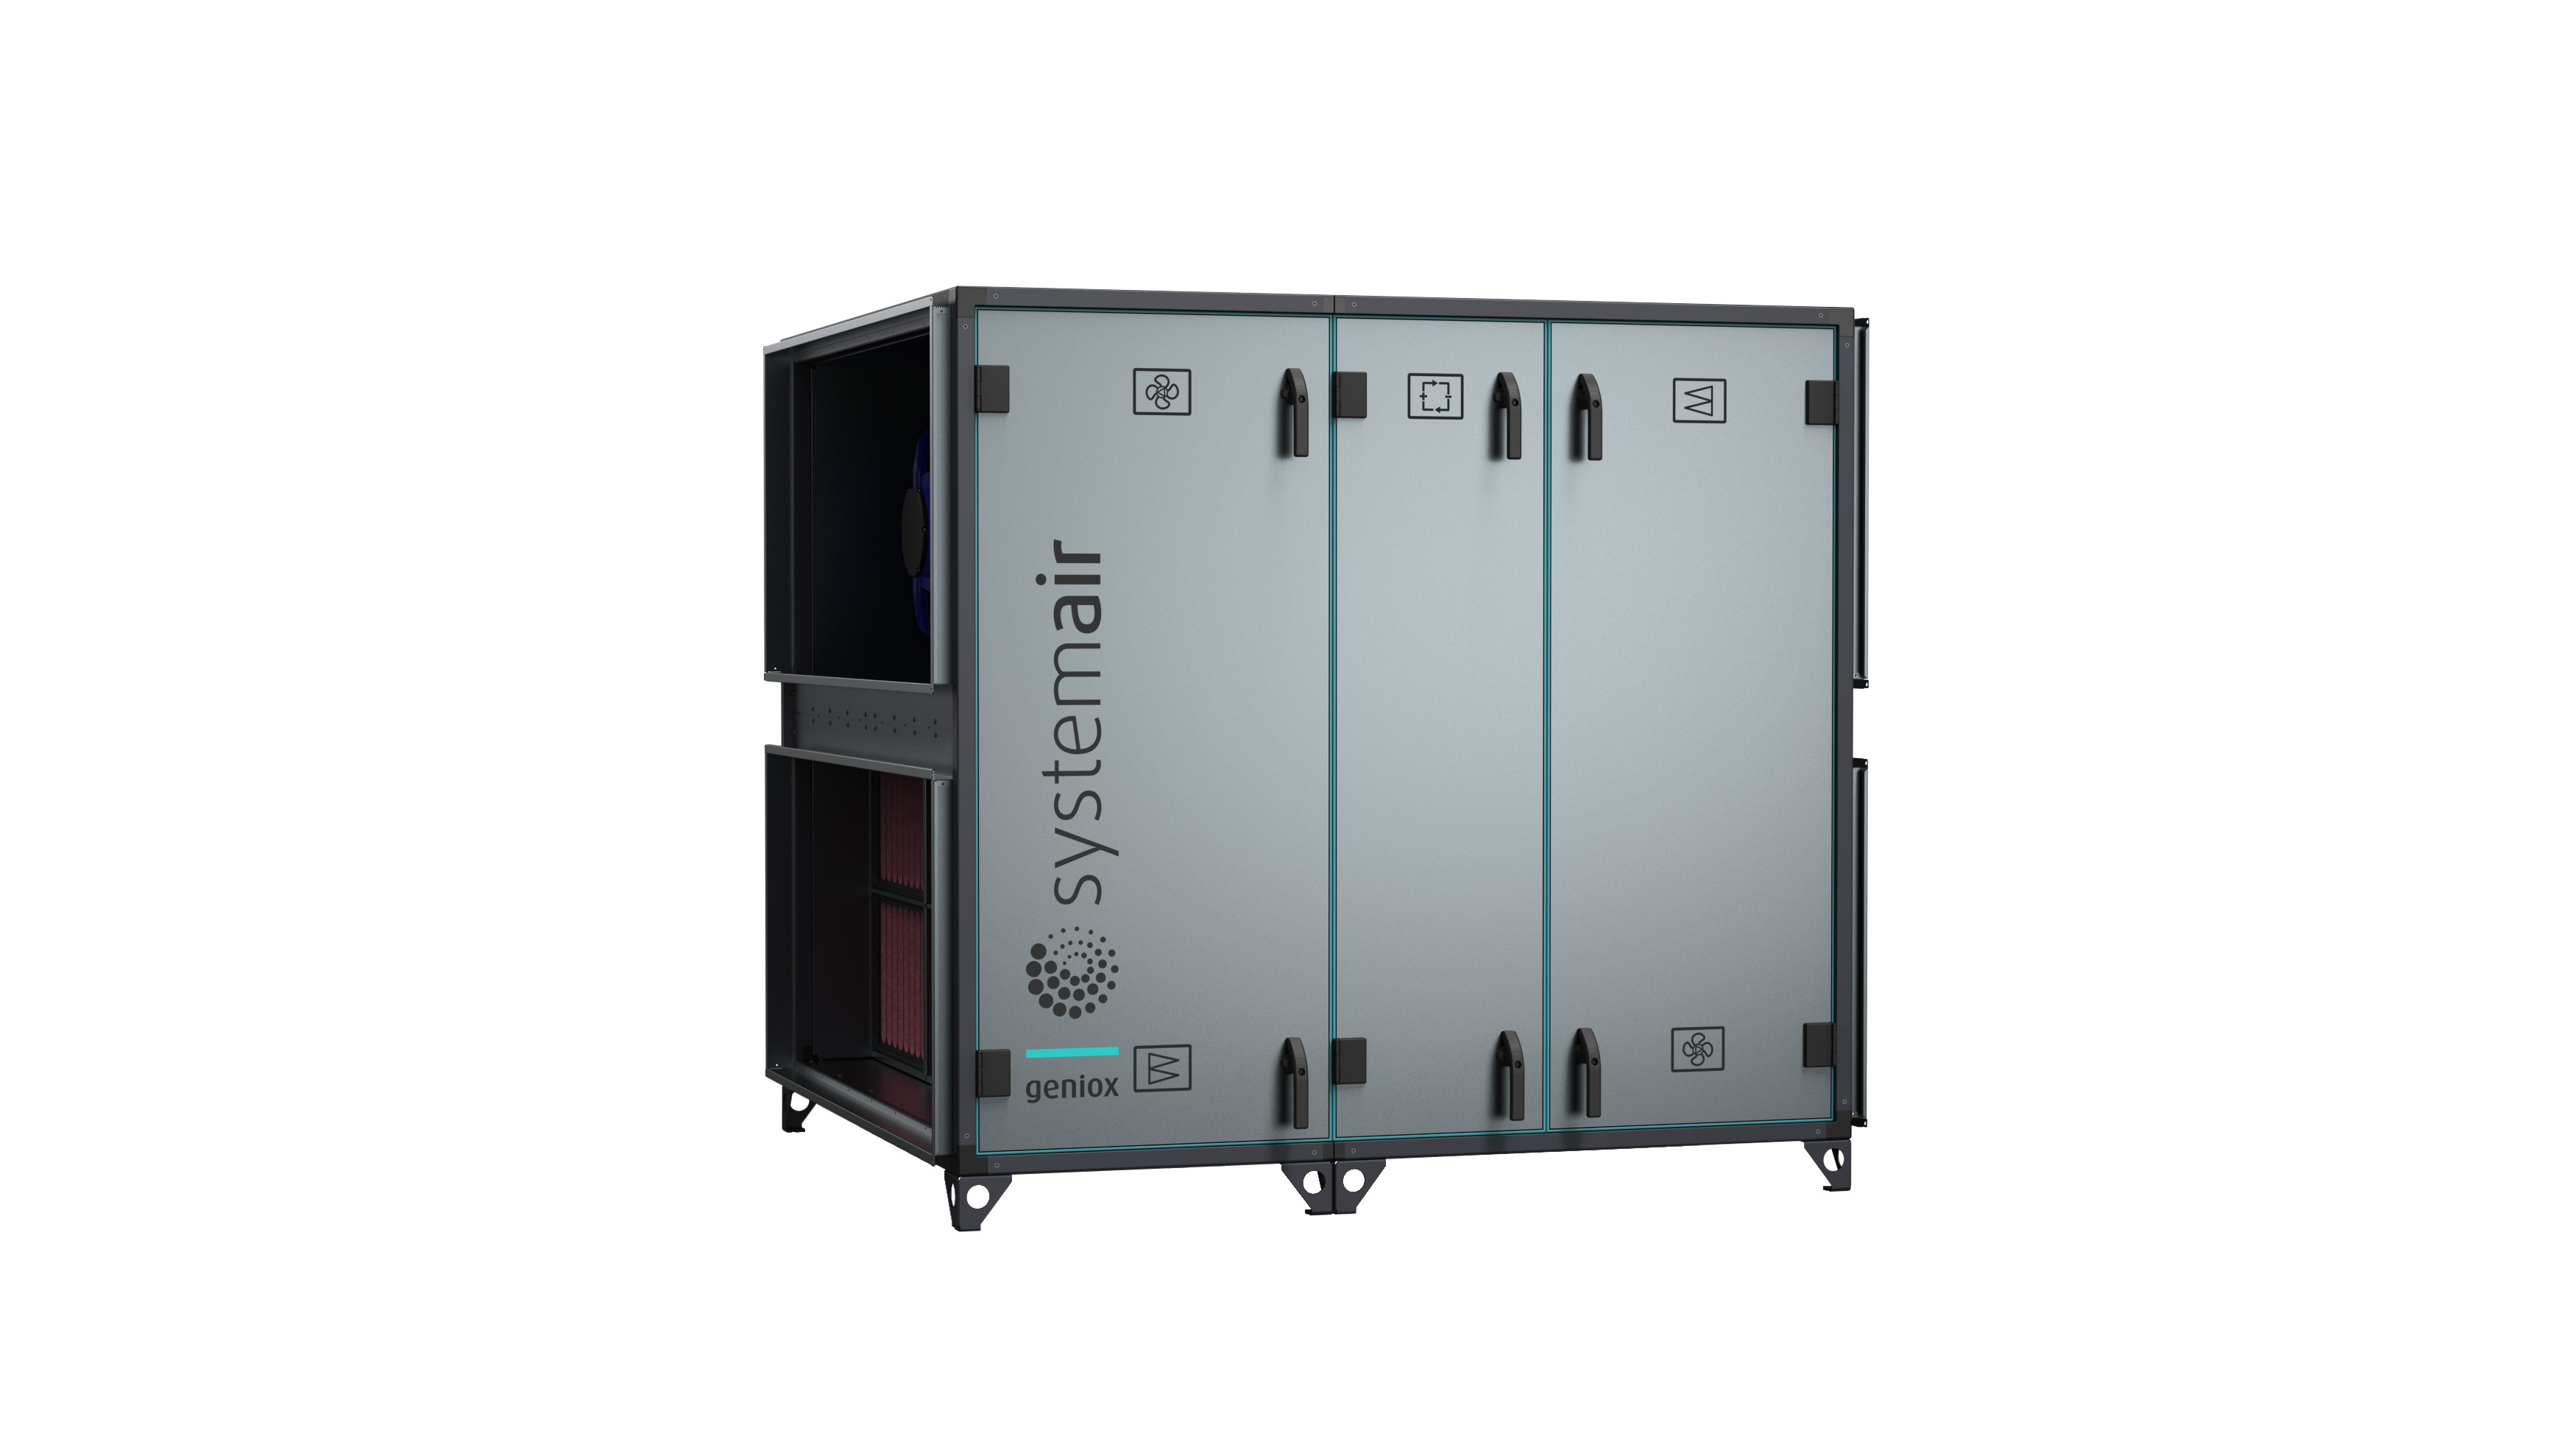 Geniox Core - Geniox - Air Handling Units - Products - Systemair